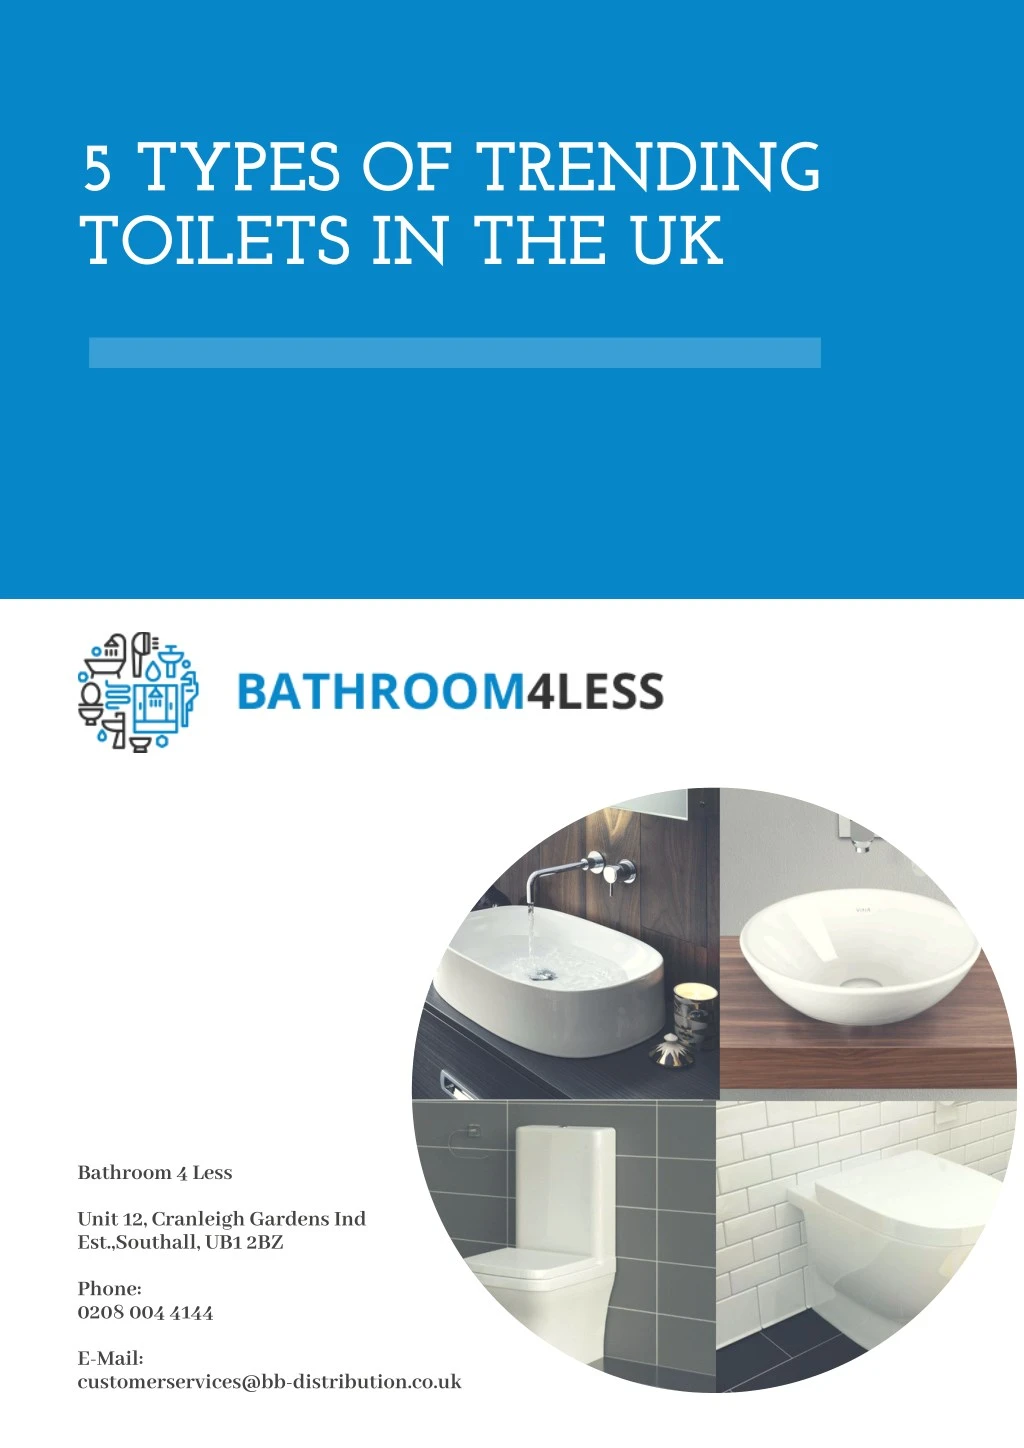 5 types of trending toilets in the uk